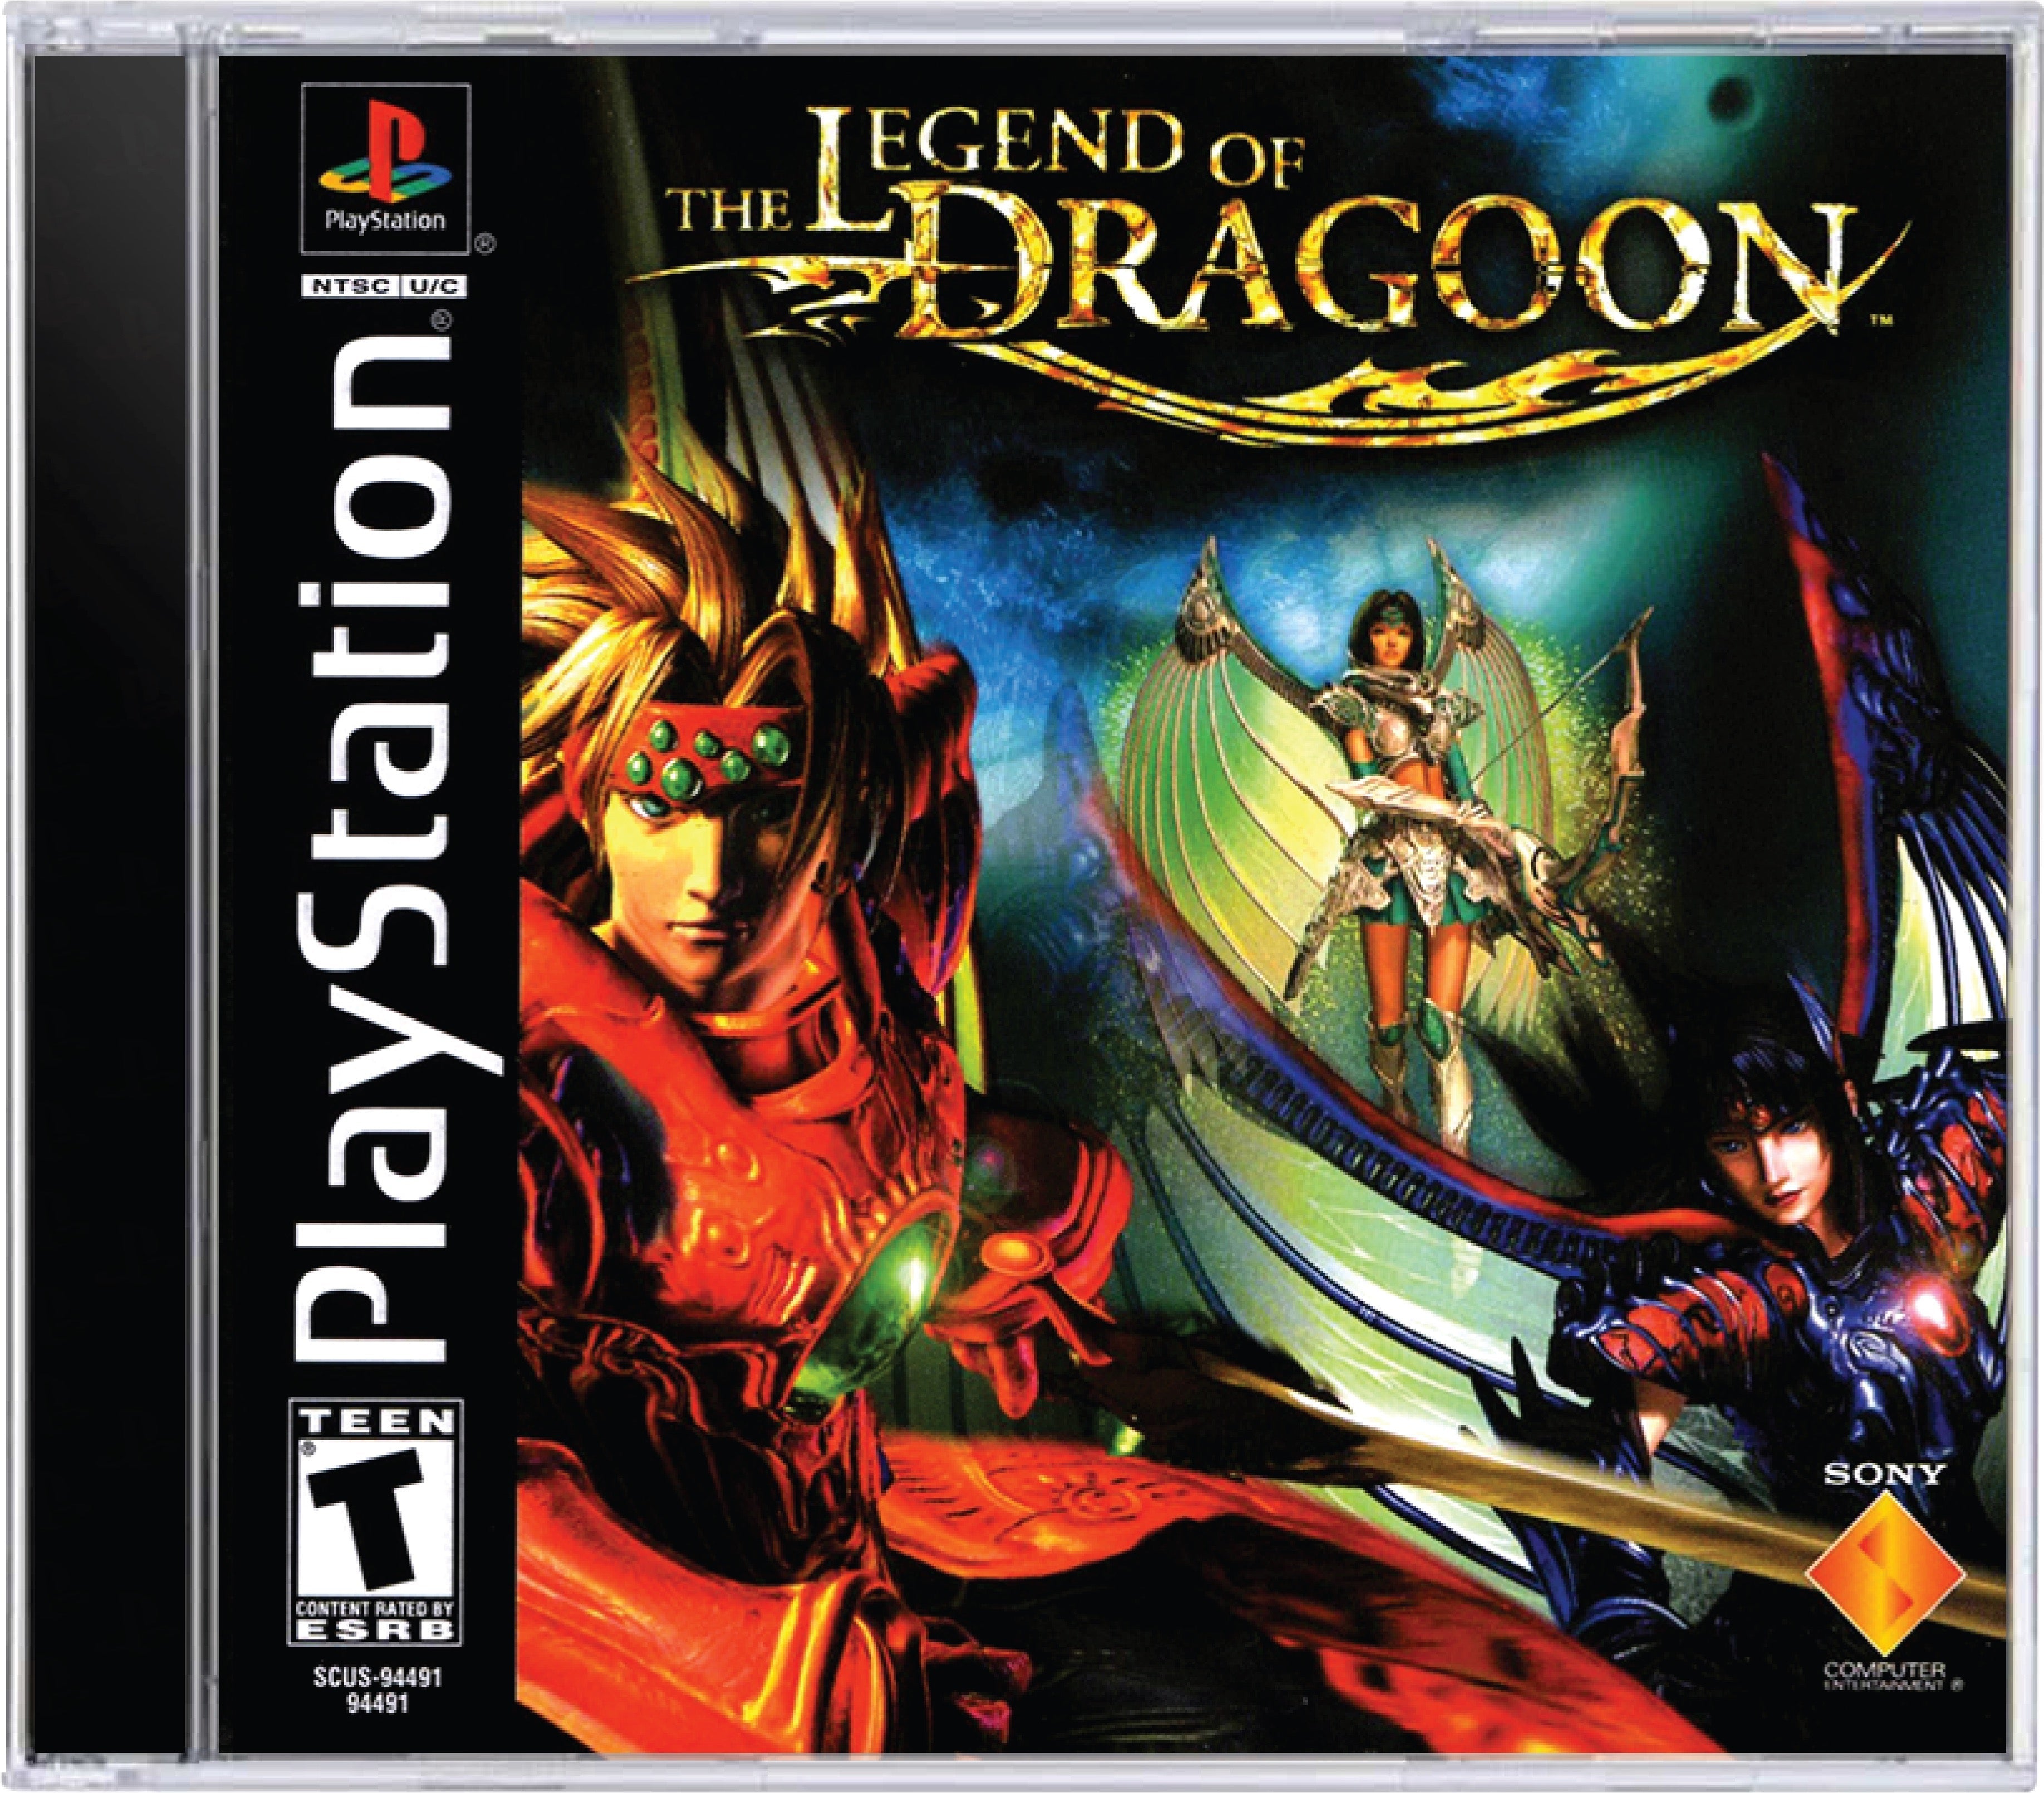 Legend of Dragoon Cover Art and Product Photo